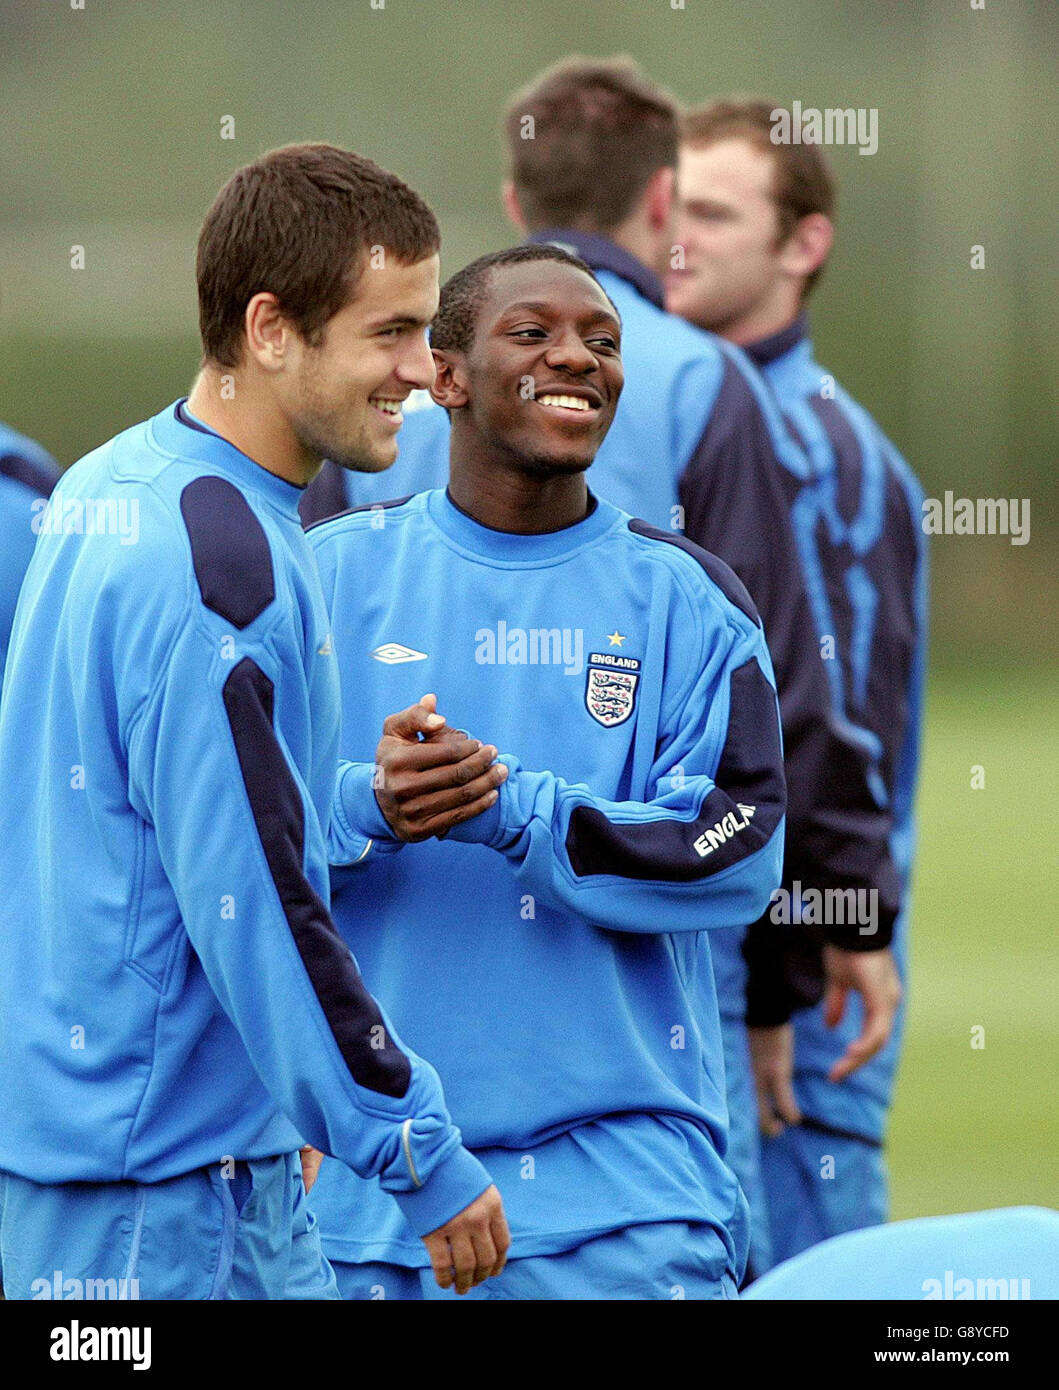 England's Joe Cole (L) and Shaun Wright-Phillips during a training session at Carrington, Manchester, Tuesday October 11, 2005, ahead of their World Cup qualifying match against Poland tomorrow evening. PRESS ASSOCIATION Photo. Photo credit should read: Martin Rickett/PA. Stock Photo